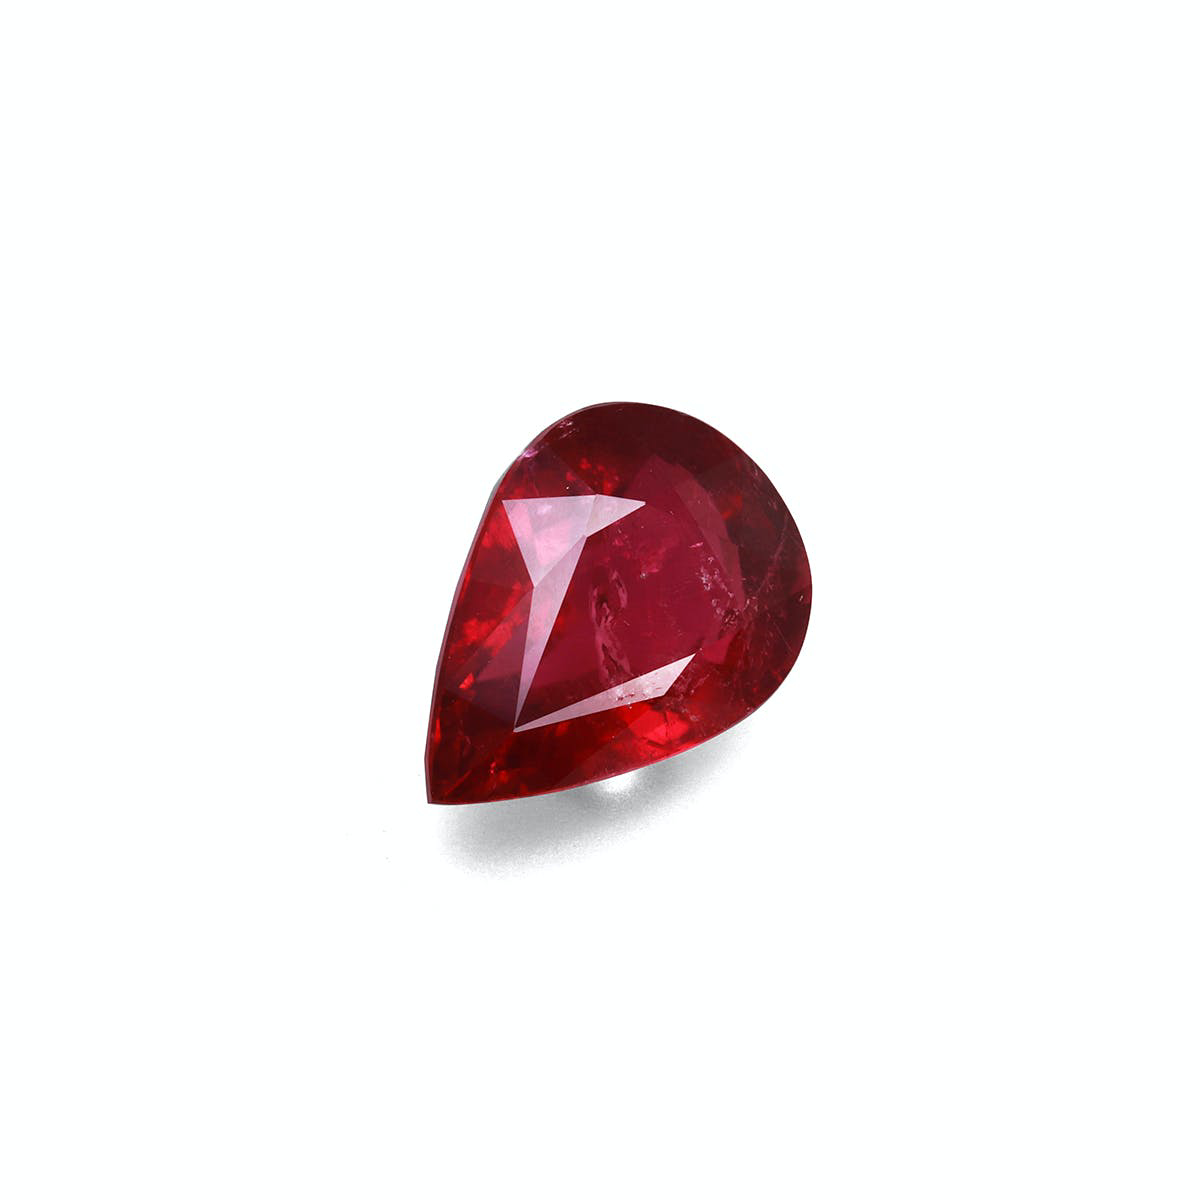 Picture of Scarlet Red Rubellite Tourmaline 12.81ct (RL0252)